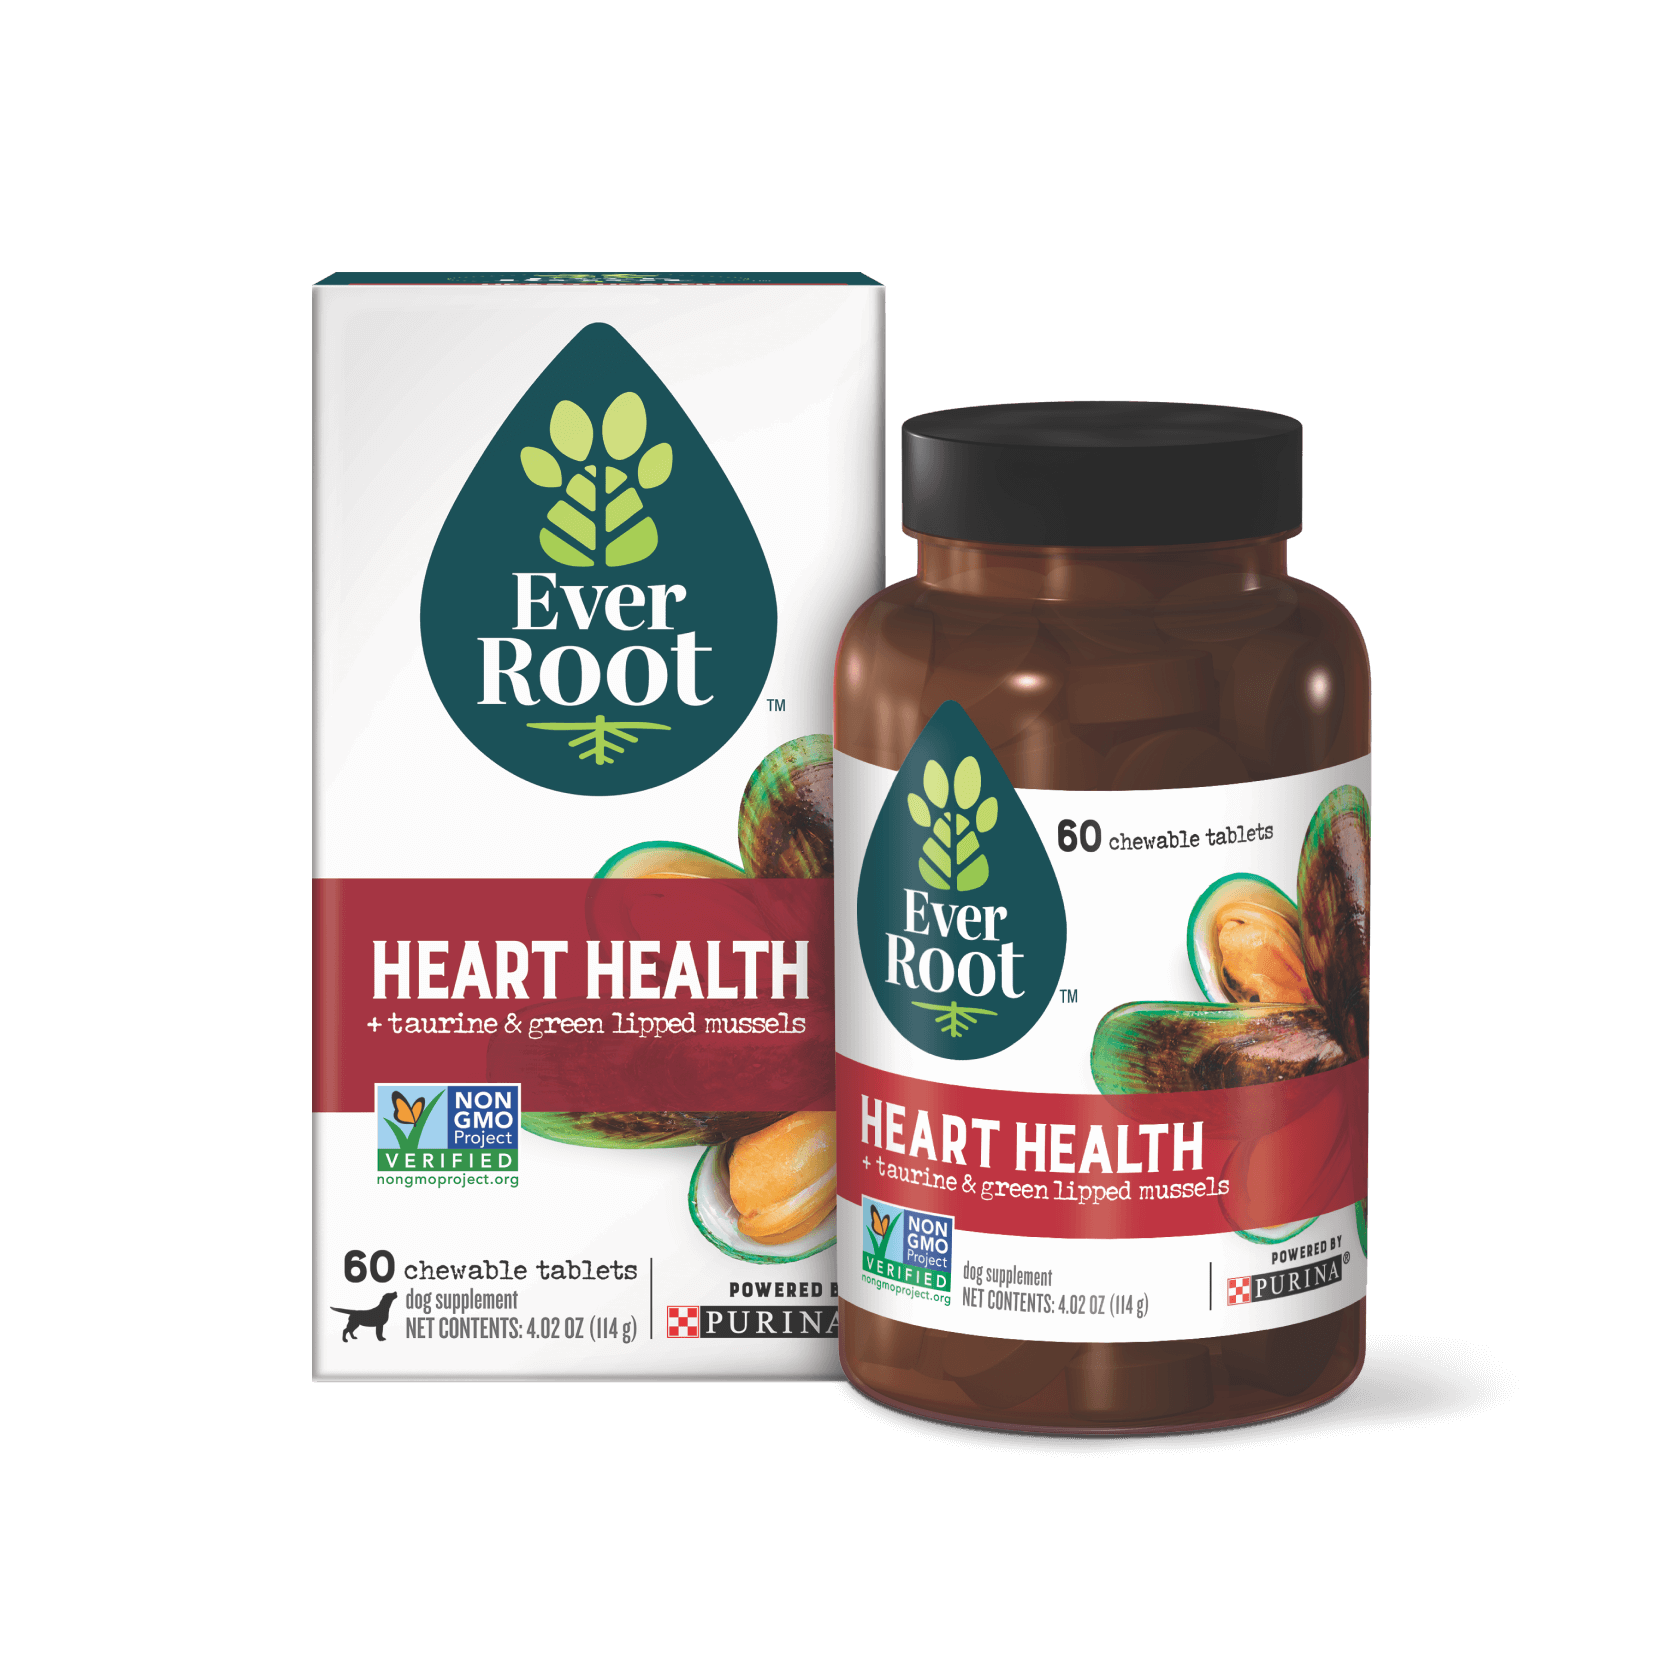 EverRoot Heart Health Chewable Tablets with packaging